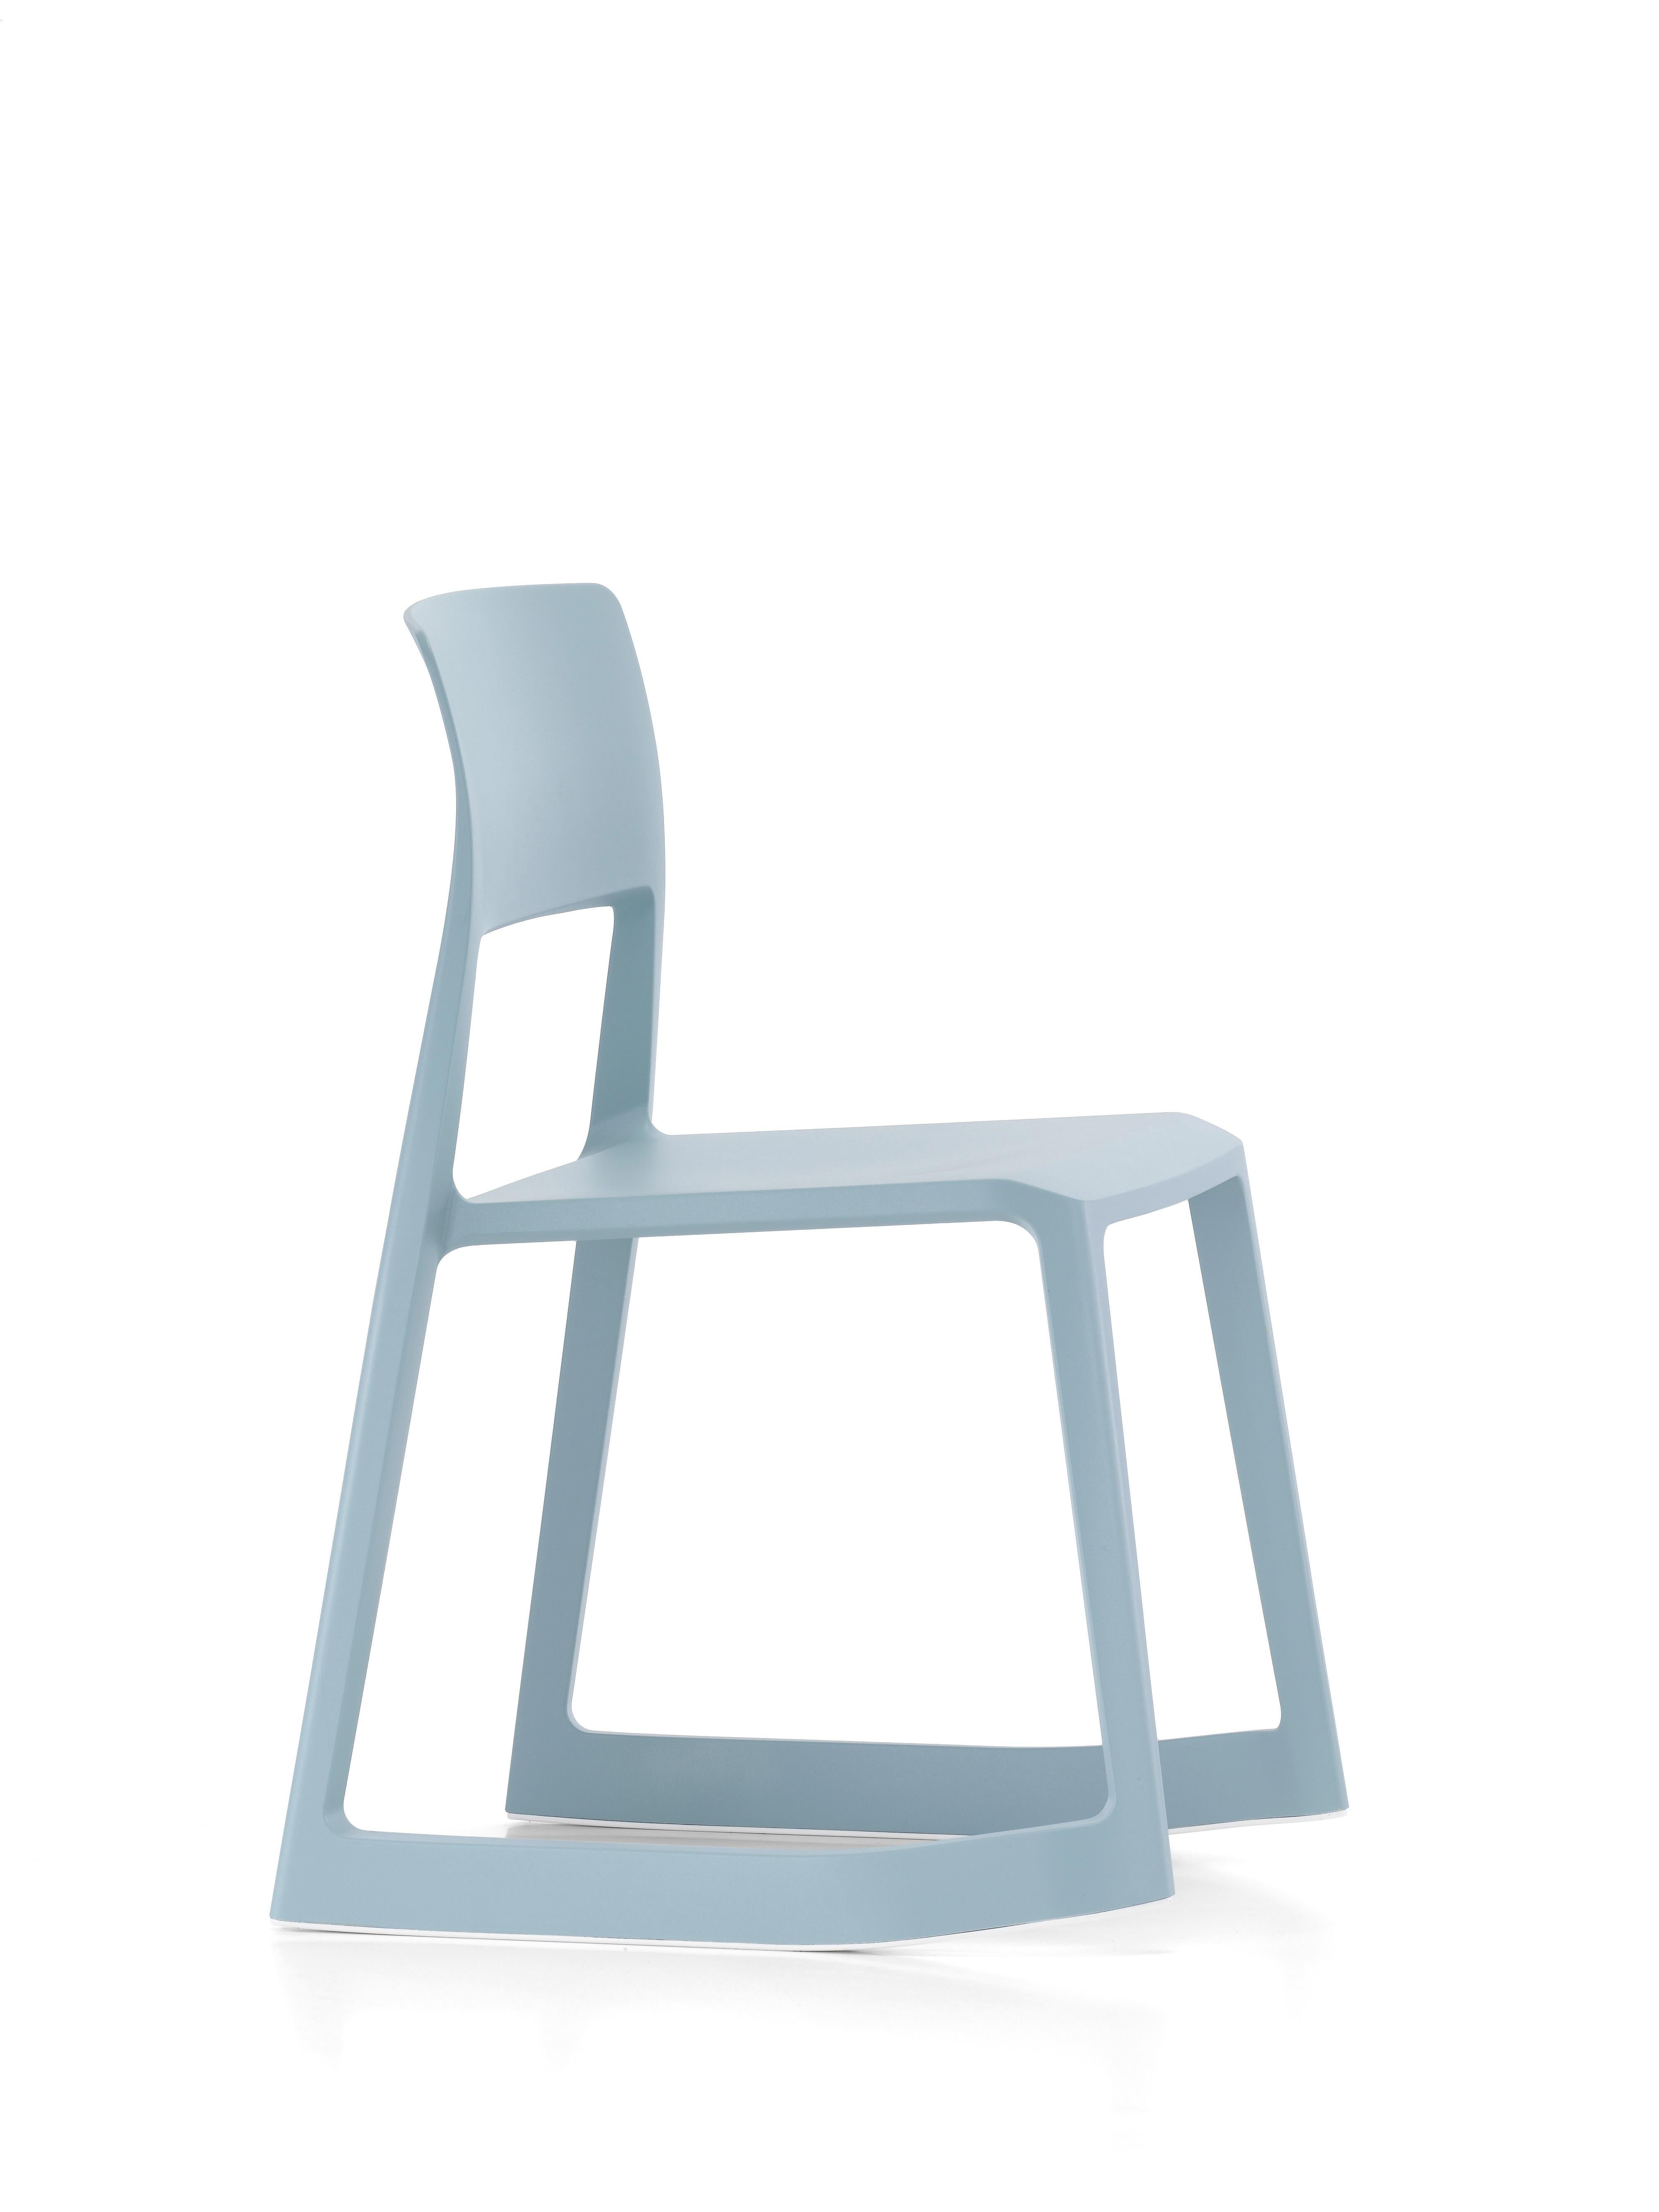 Vitra Tip Ton Chair in Ice Gray Edward Barber & Jay Osgerby In New Condition For Sale In New York, NY